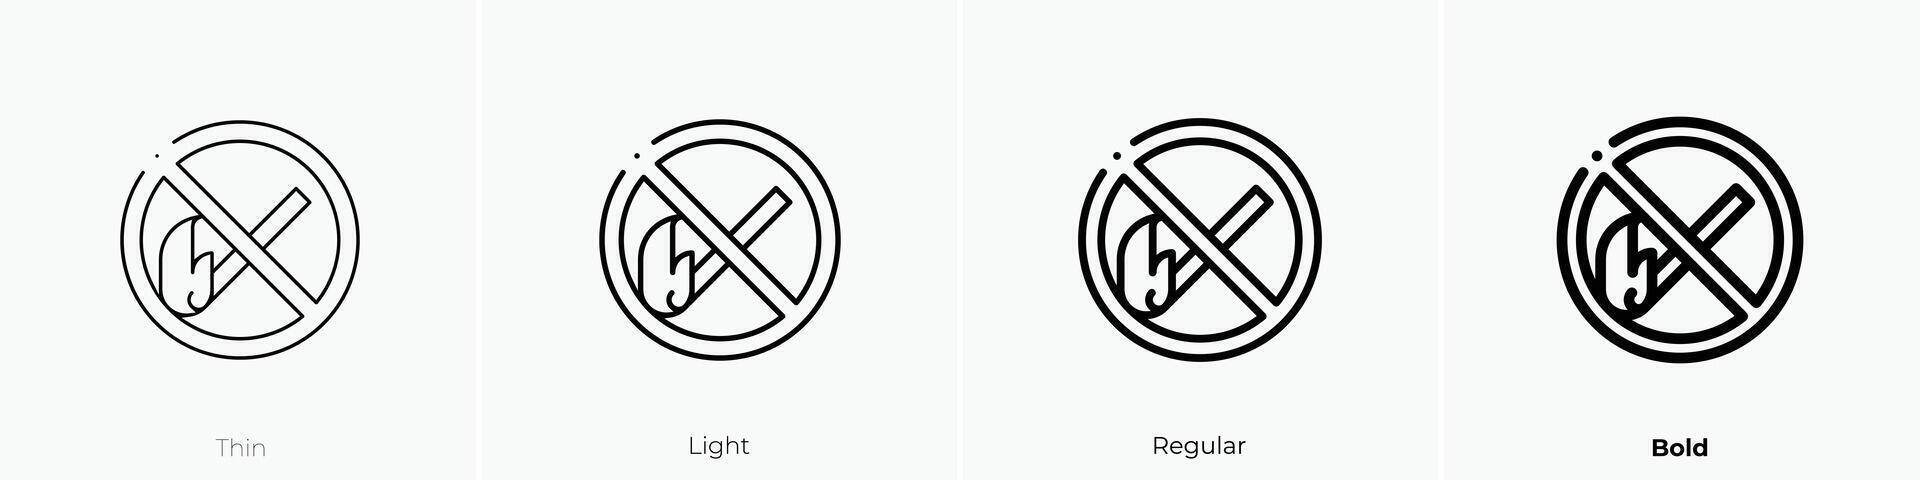 no fire icon. Thin, Light, Regular And Bold style design isolated on white background vector